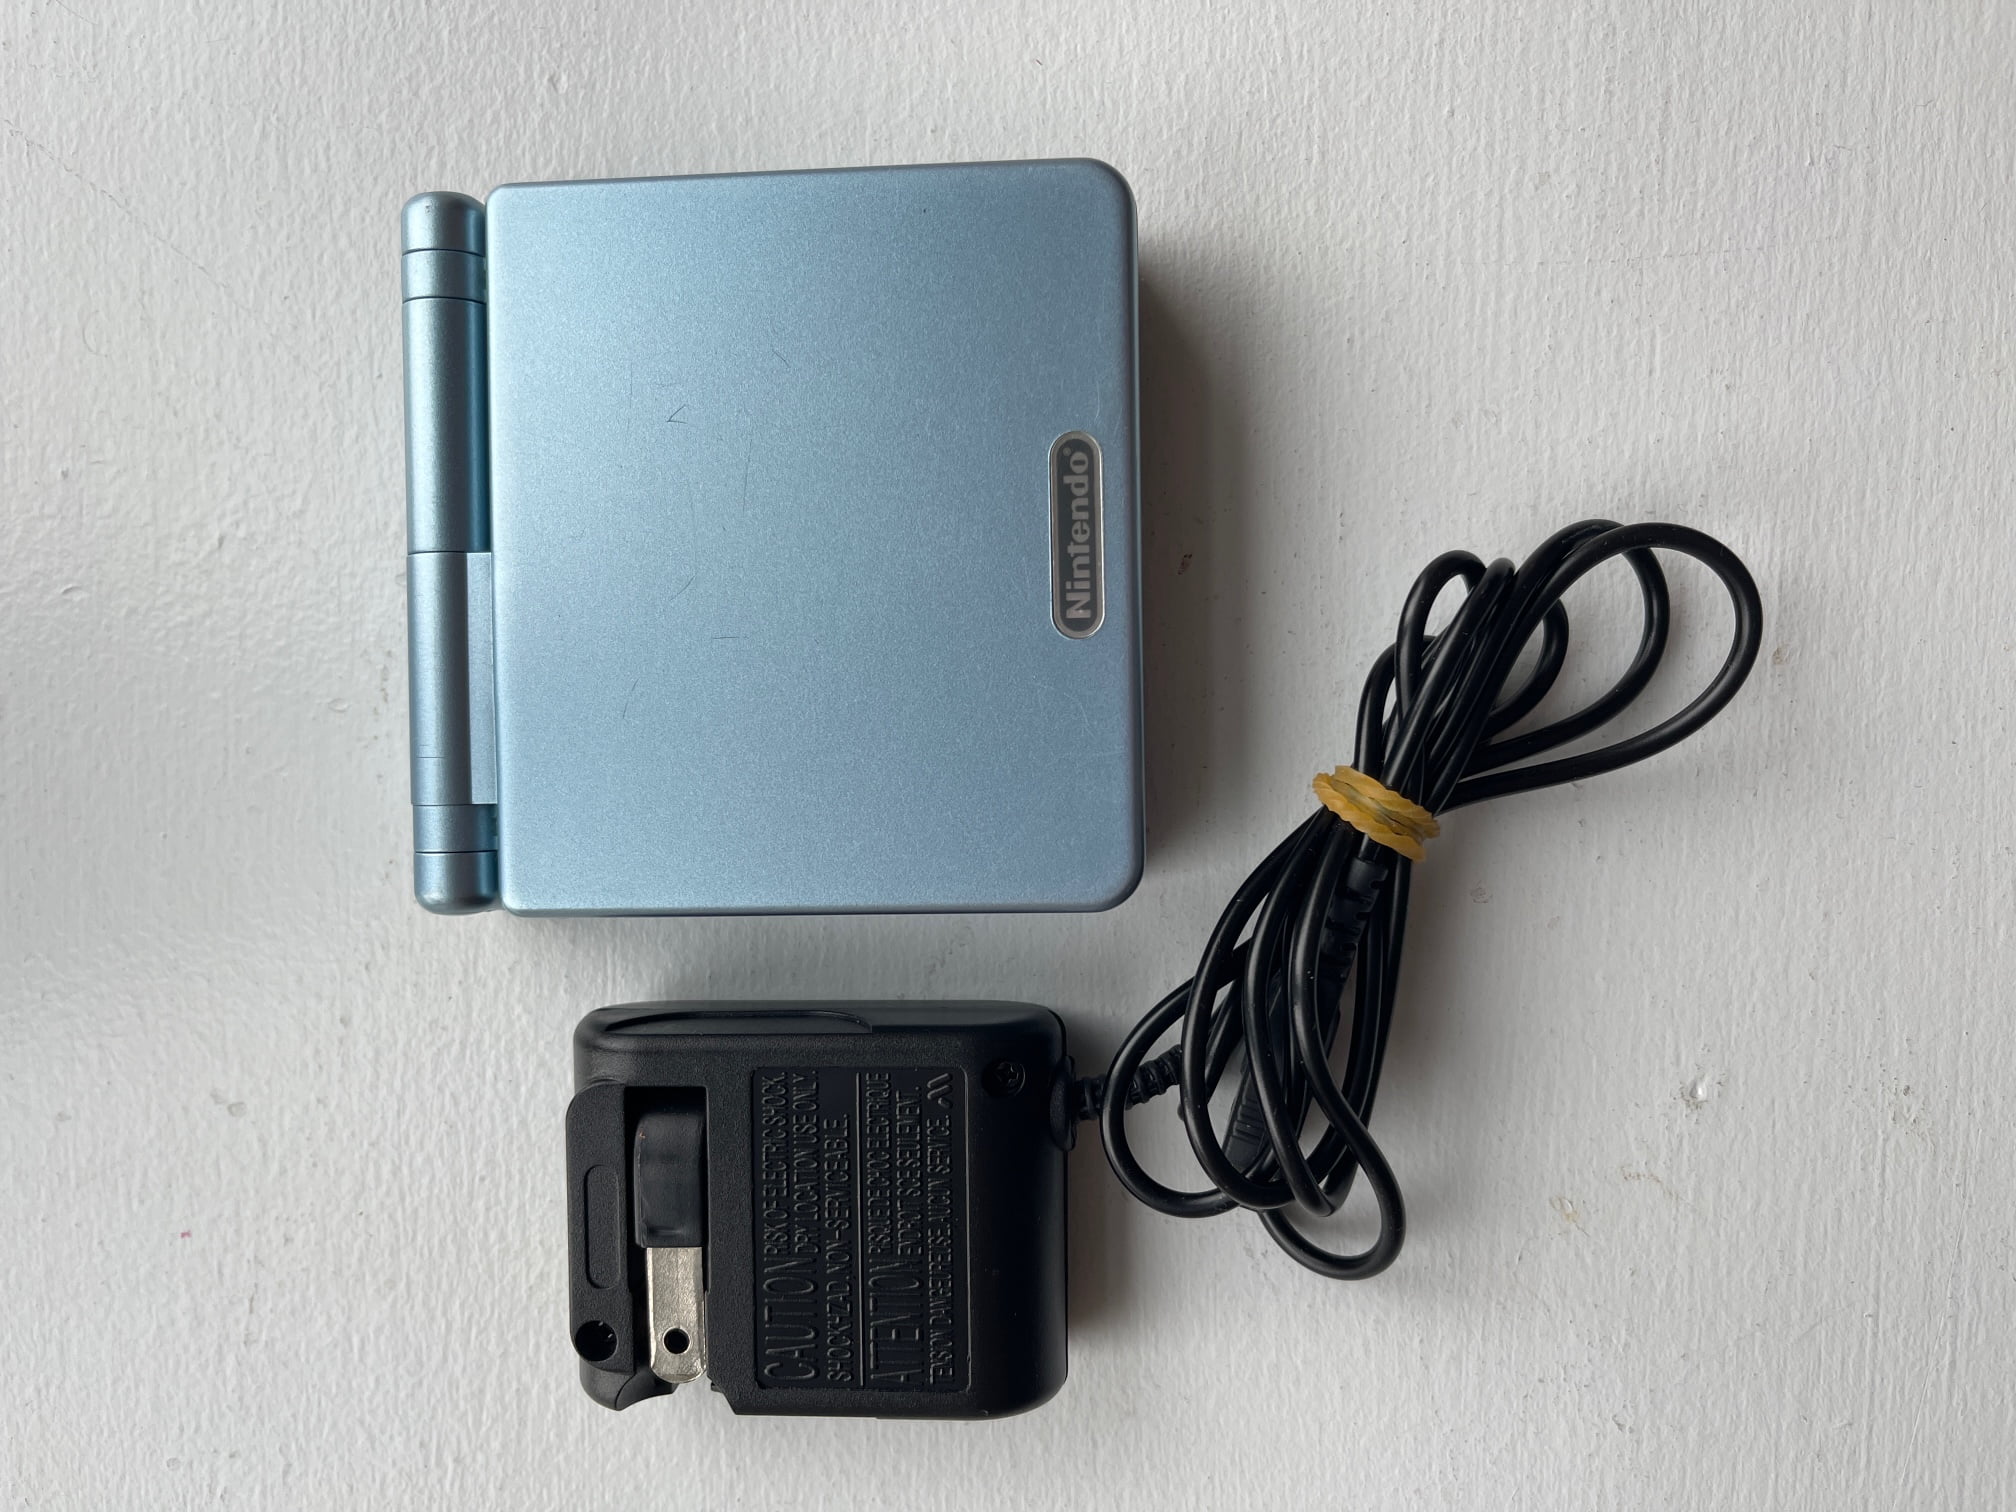 Nintendo GameBoy Advance SP GBA Game Boy SP Pearl Blue Handheld Console  With Charger and Box Works Great, Tested RARE 